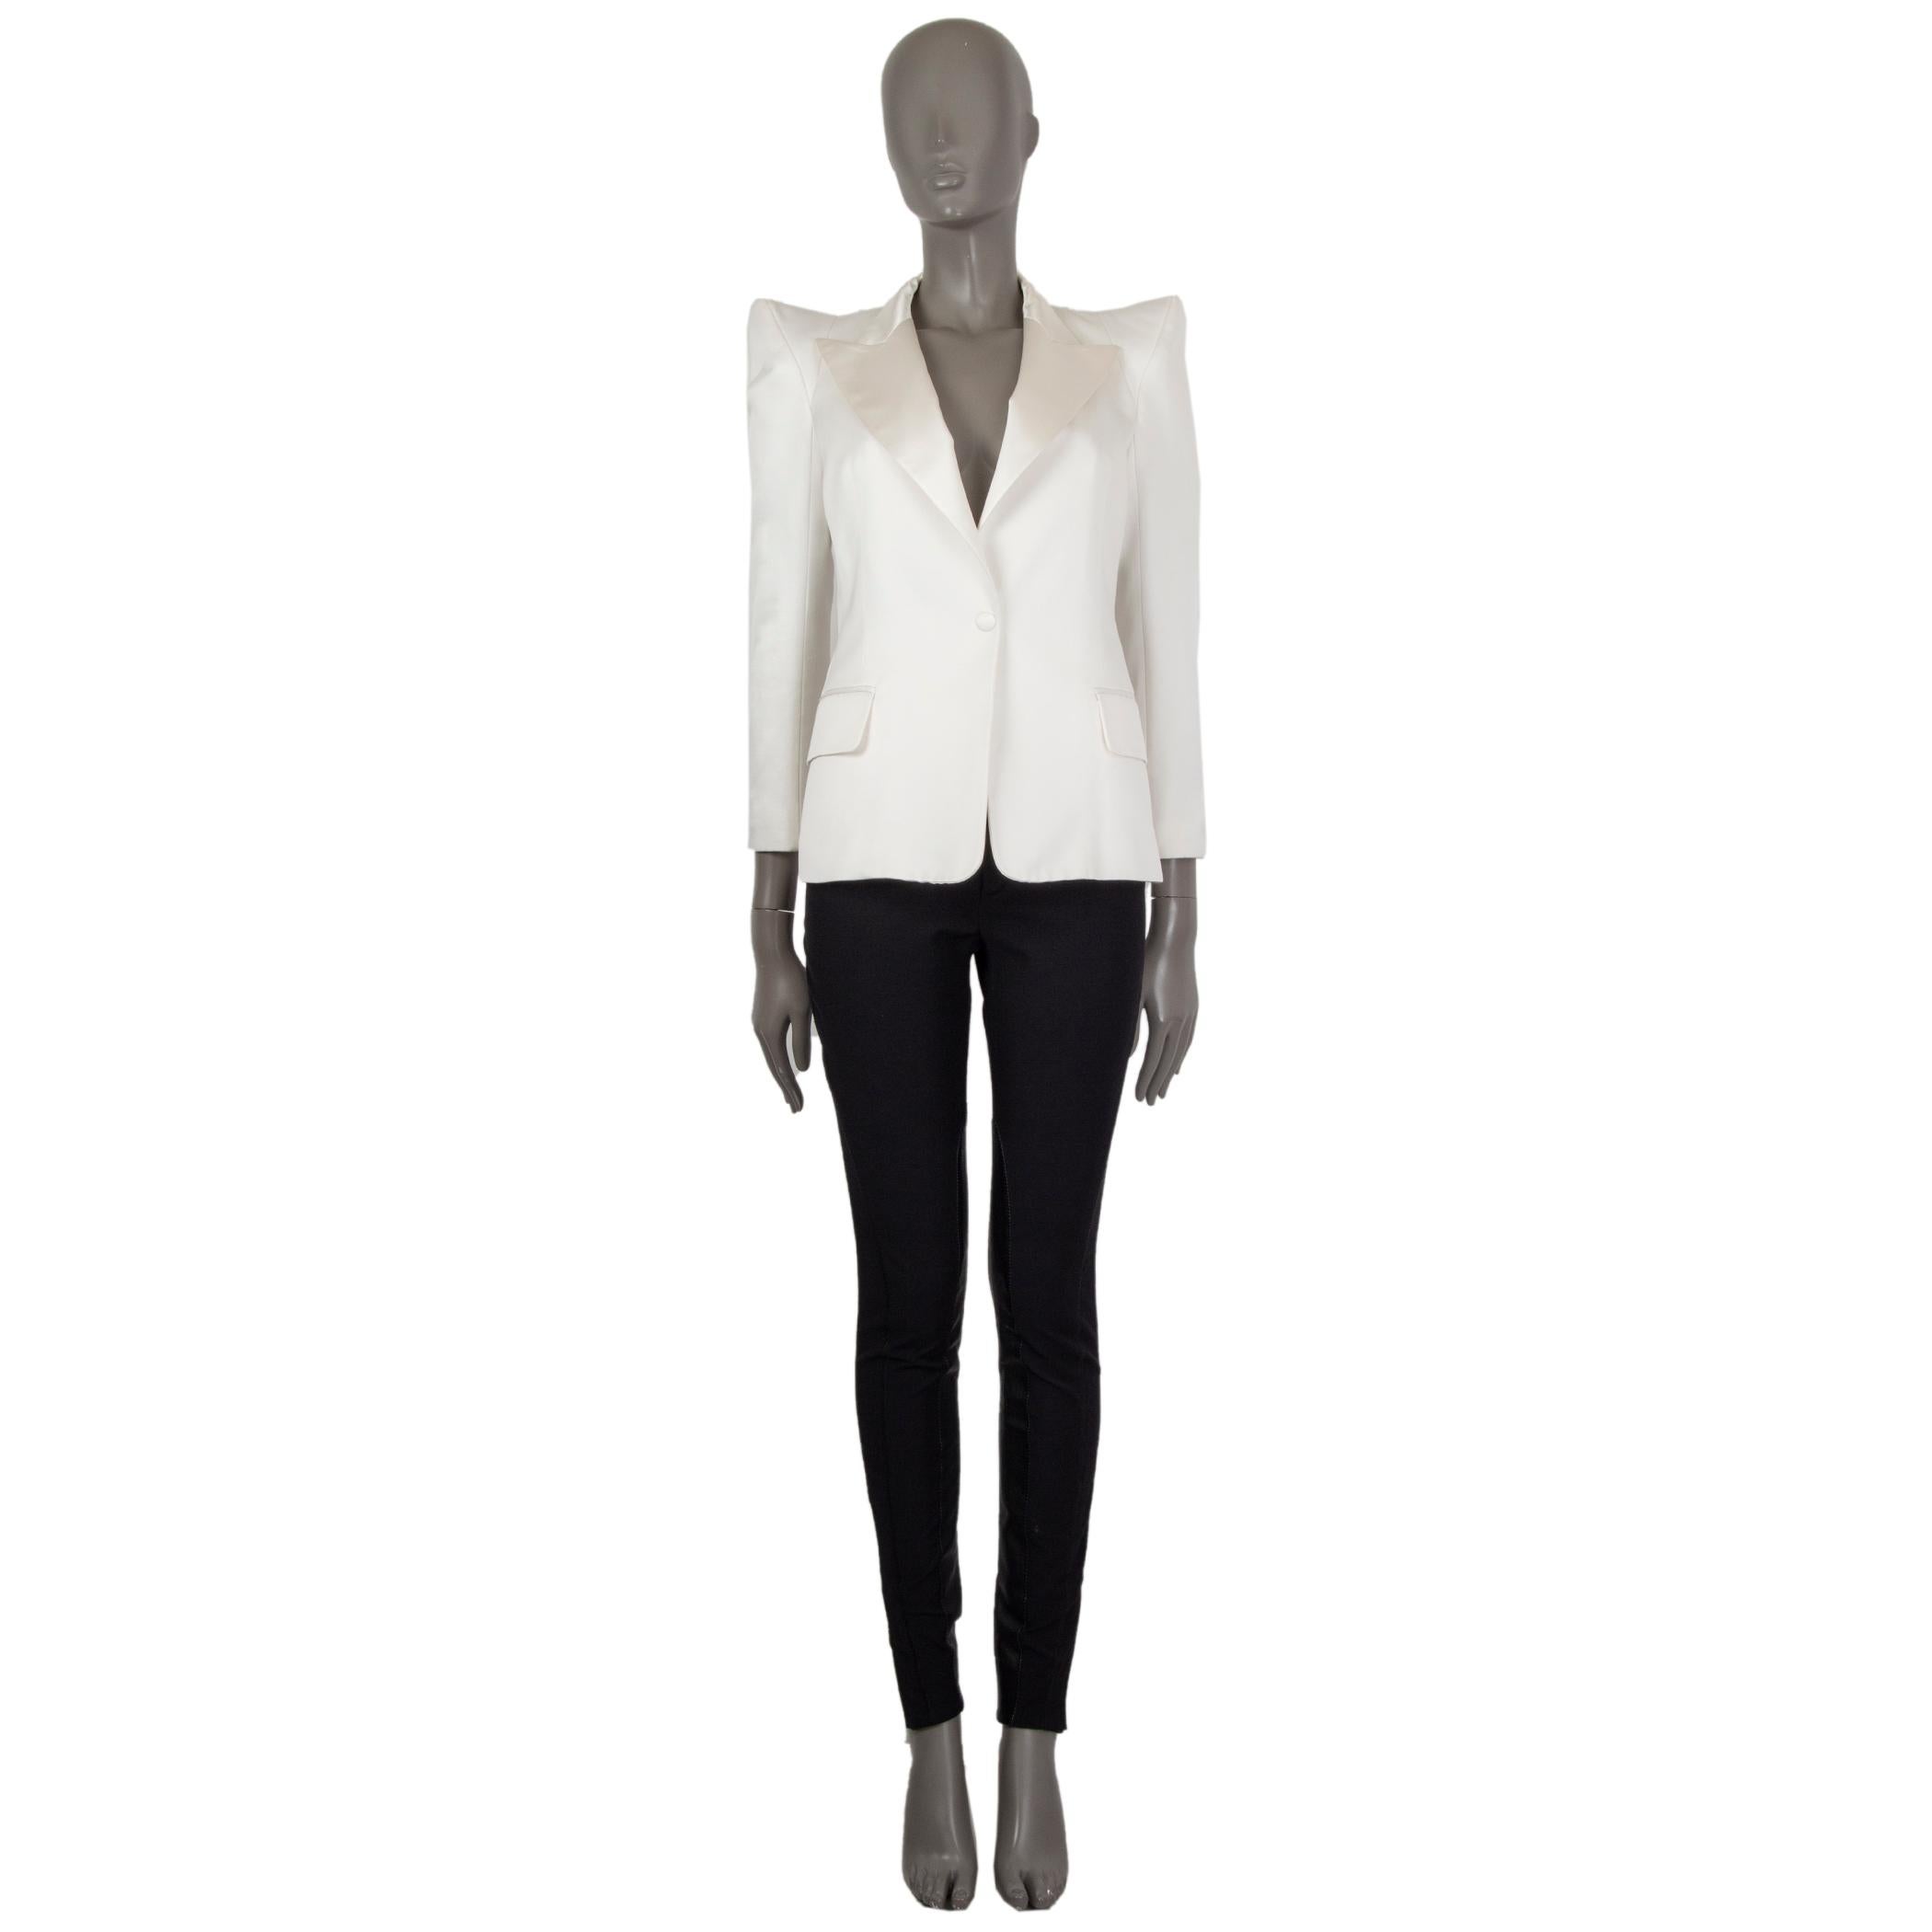 Balmain tuxedo blazer in off-white cotton (51%), polyester (39%), and silk (100%). With satin peak collar, peak shoulders, two flap pockets on the sides, and buttoned sleeves. Closes with one fabric-lined button on the front. Lined in off-white